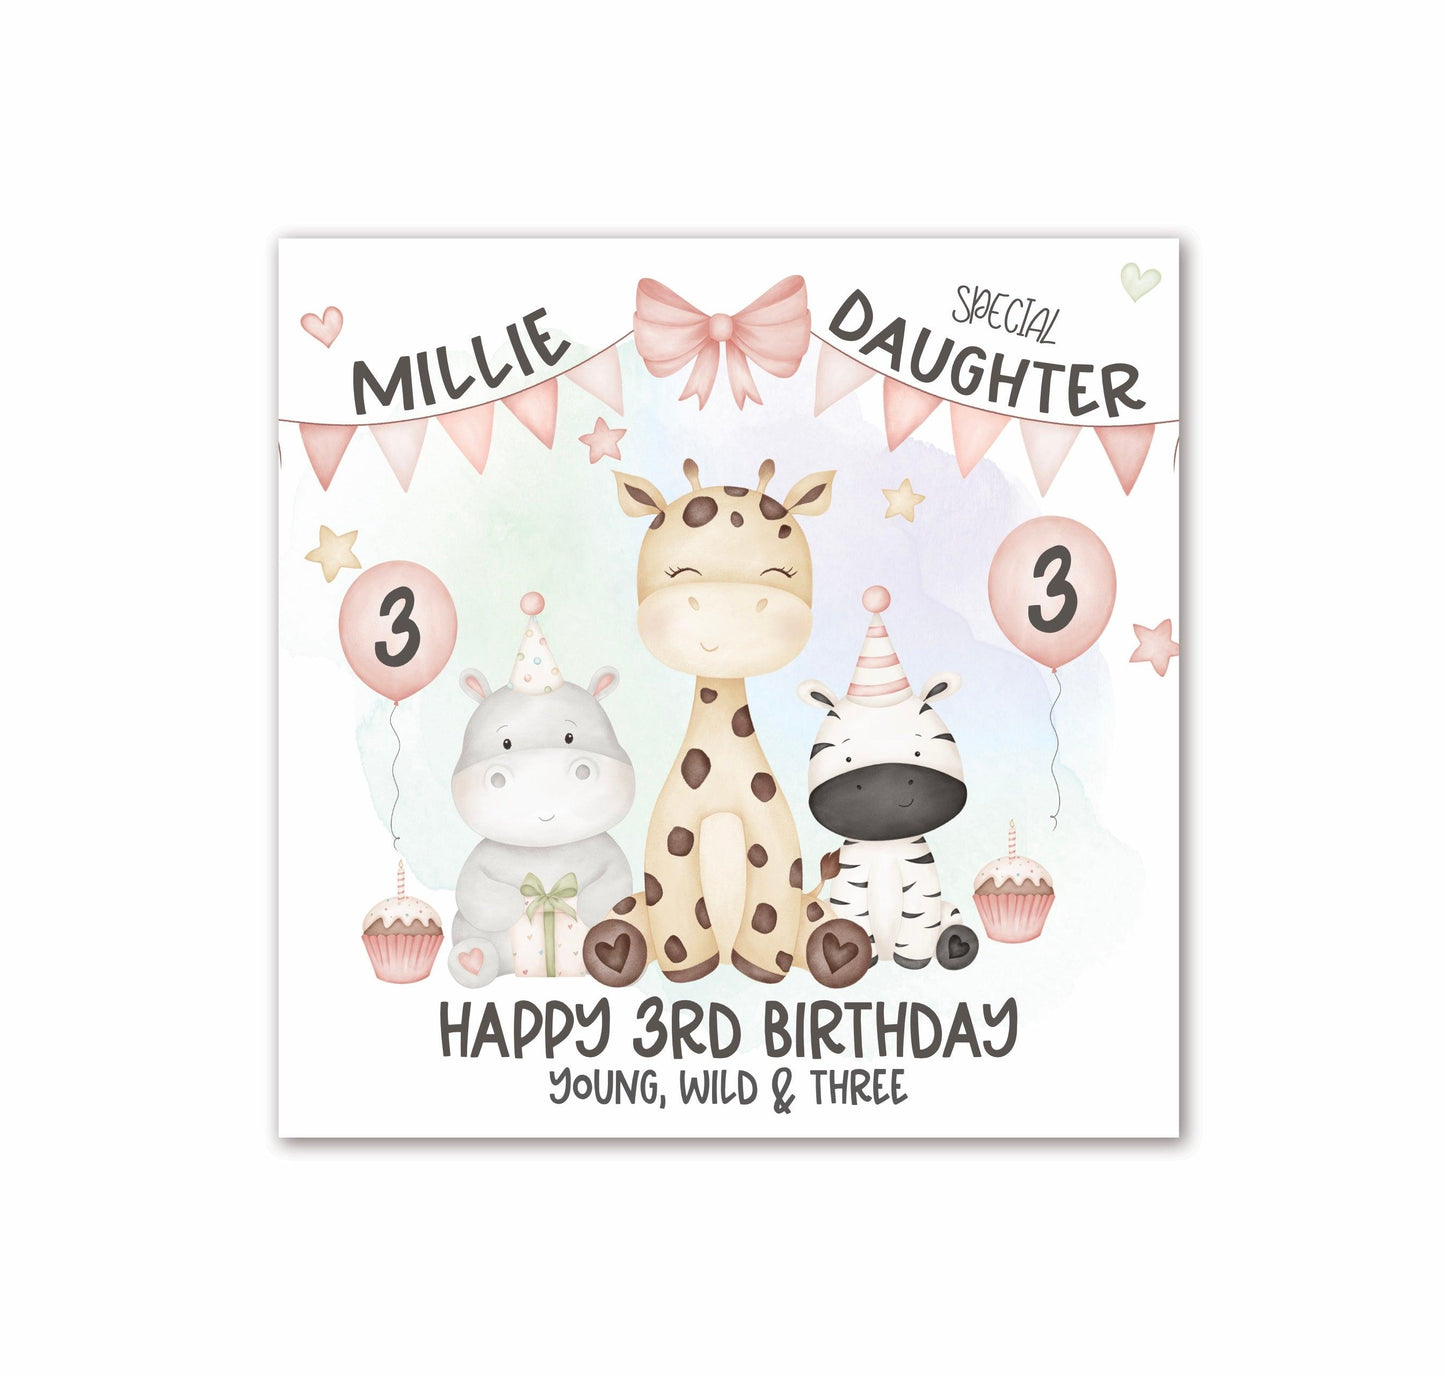 Safari Animals 3rd Birthday Card in PINK, Personalised with a Name, Special DAUGHTER, Happy 3rd Birthday Card, YOUNG, WILD & THREE, Giraffe, Rhino & Zebra [Oliver Rose Designs]